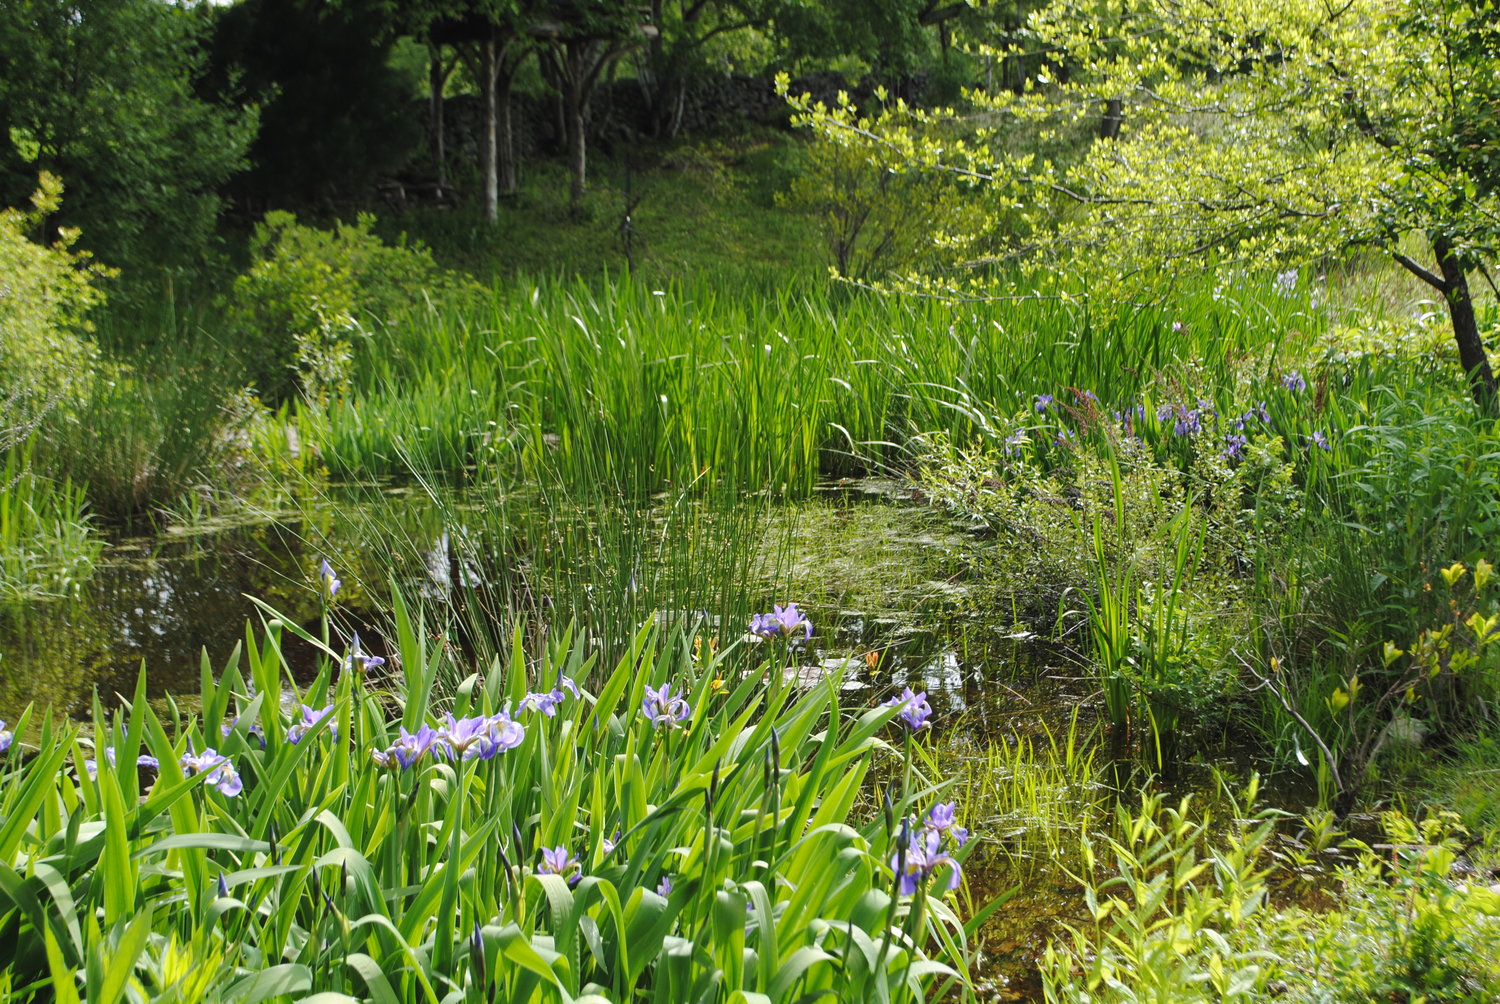 Irises are a beautiful part of a water garden.